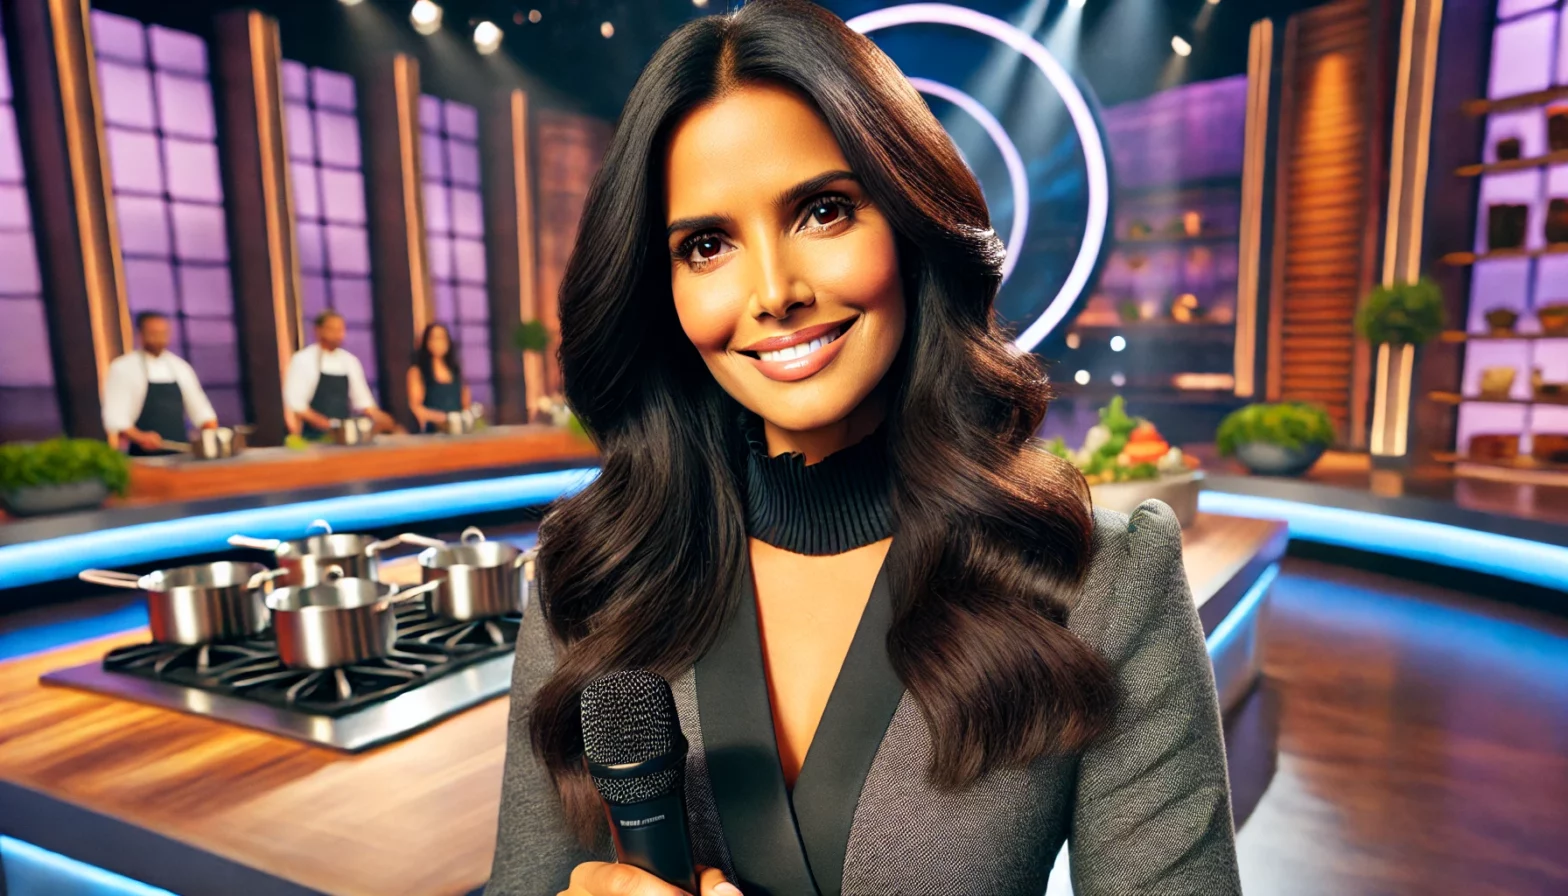 Padma Lakshmi, an Indian-American TV host, stands confidently on a well-lit stage of a reality TV show, holding a microphone. She is wearing a chic, modern outfit, smiling warmly, with cooking stations and contestants in the background, embodying her role as a host.